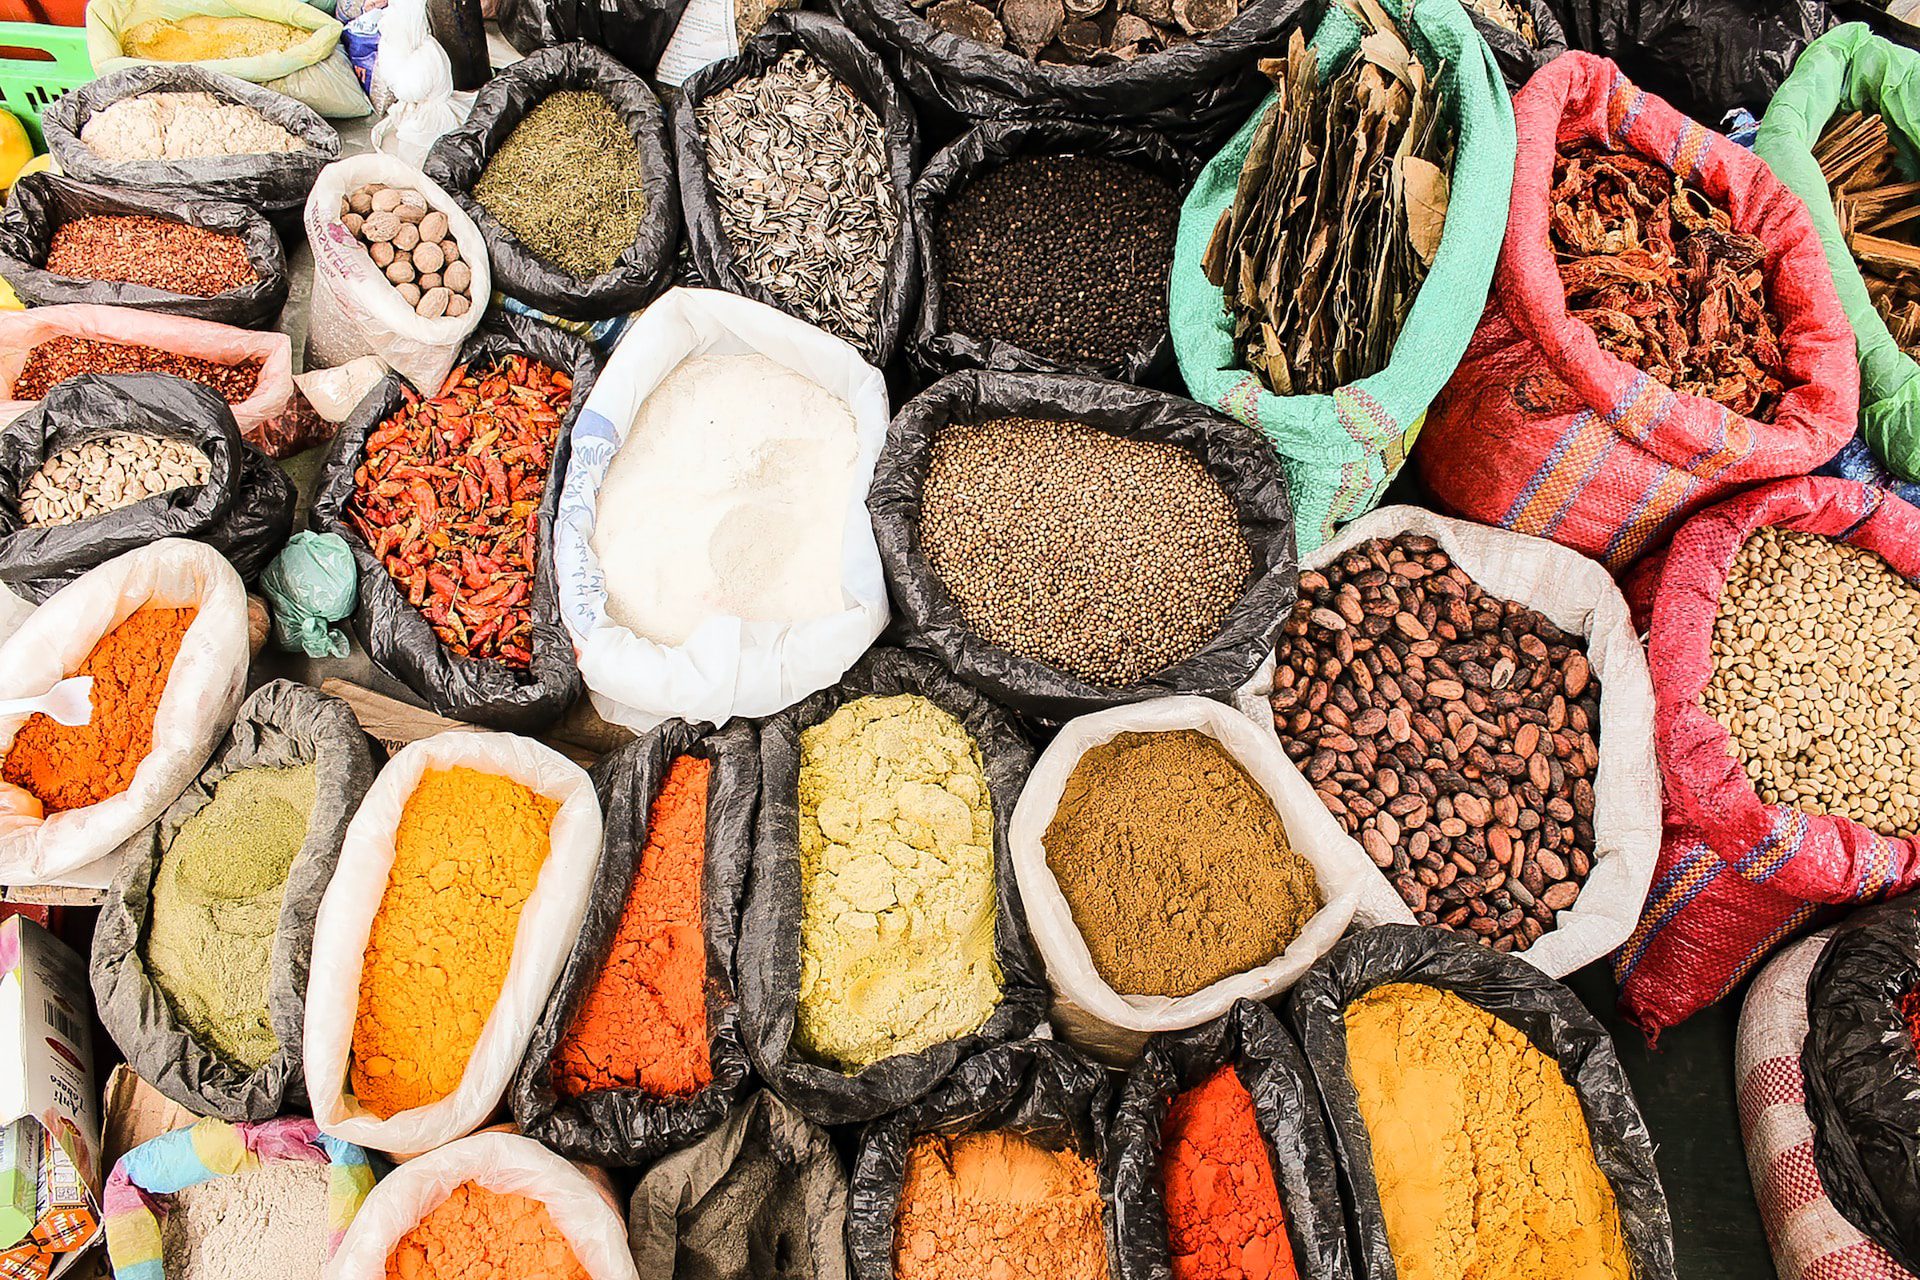 Sacks of colourful spices, herbs and other local products.